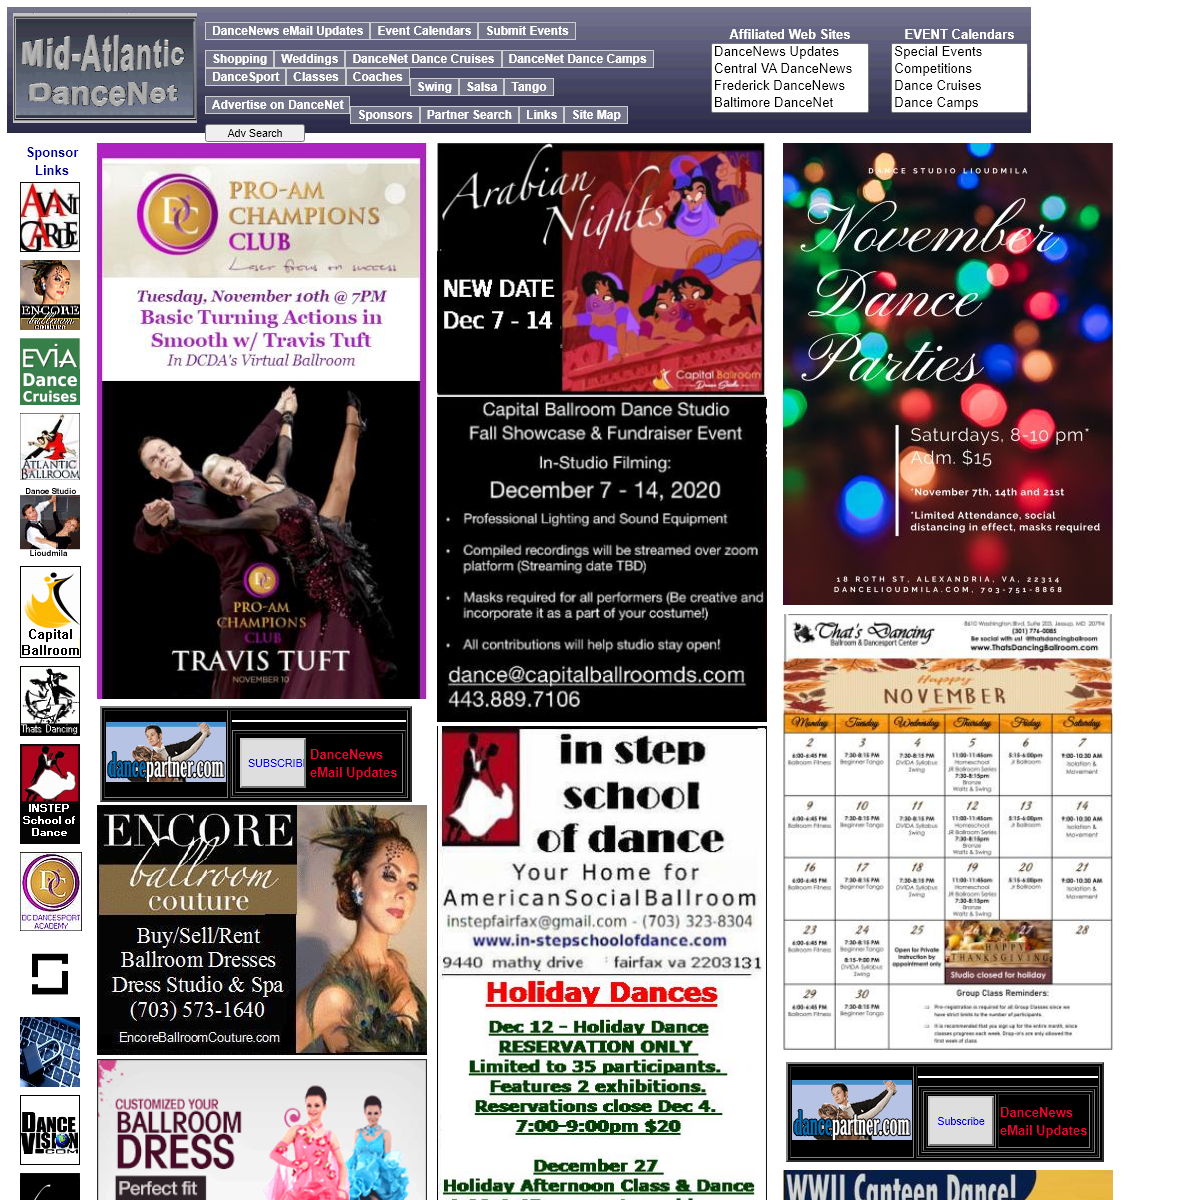 The Mid-Atlantic DanceNet`s Front Page, Gateway Page, Main Index Page